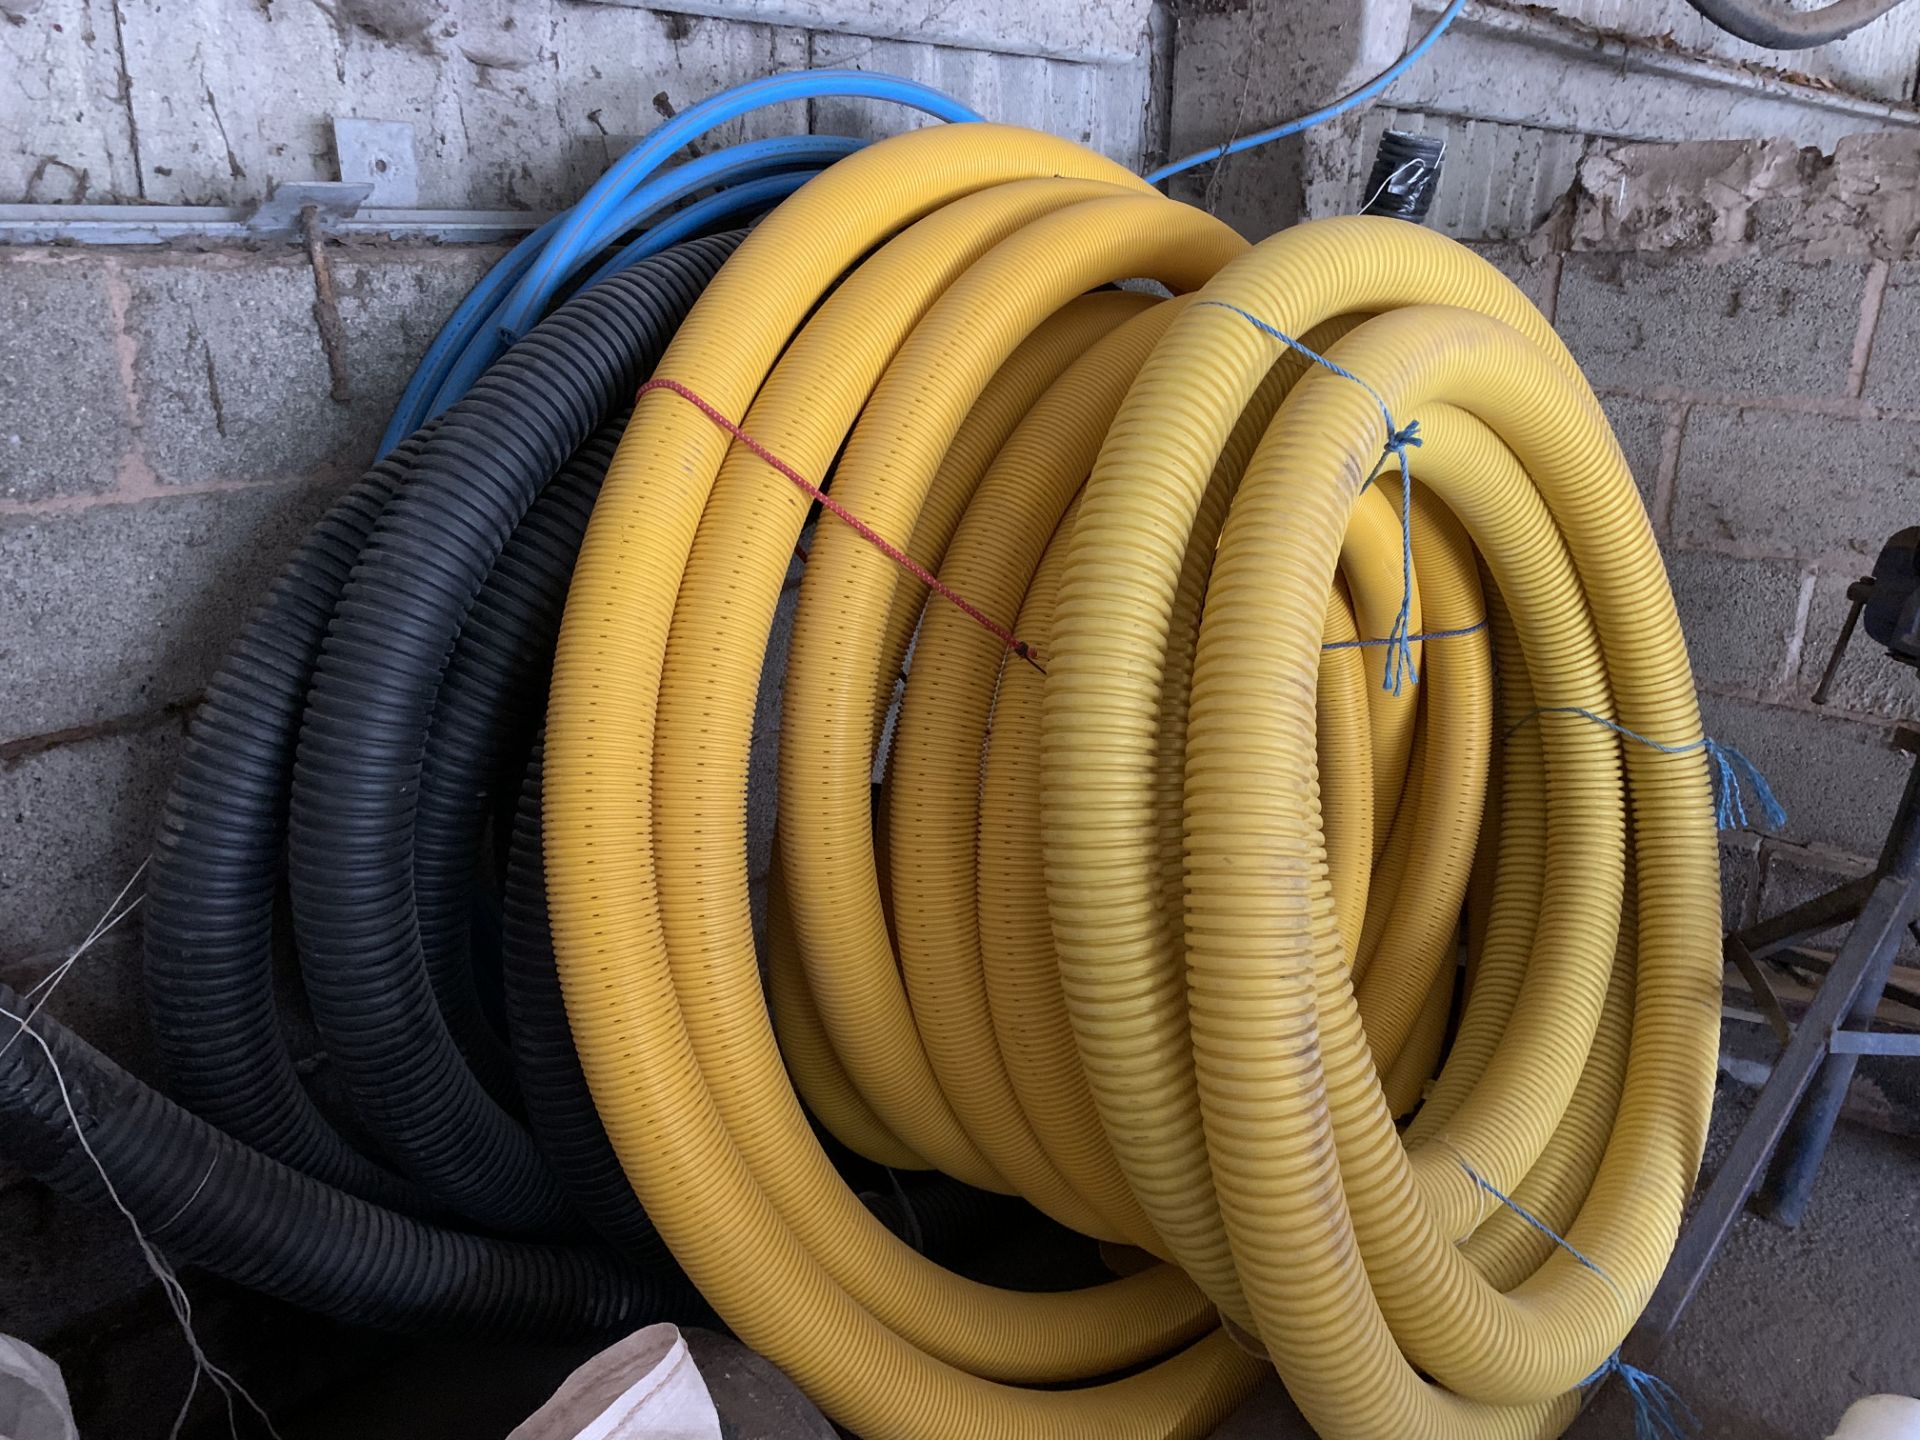 A quantity of plastic piping